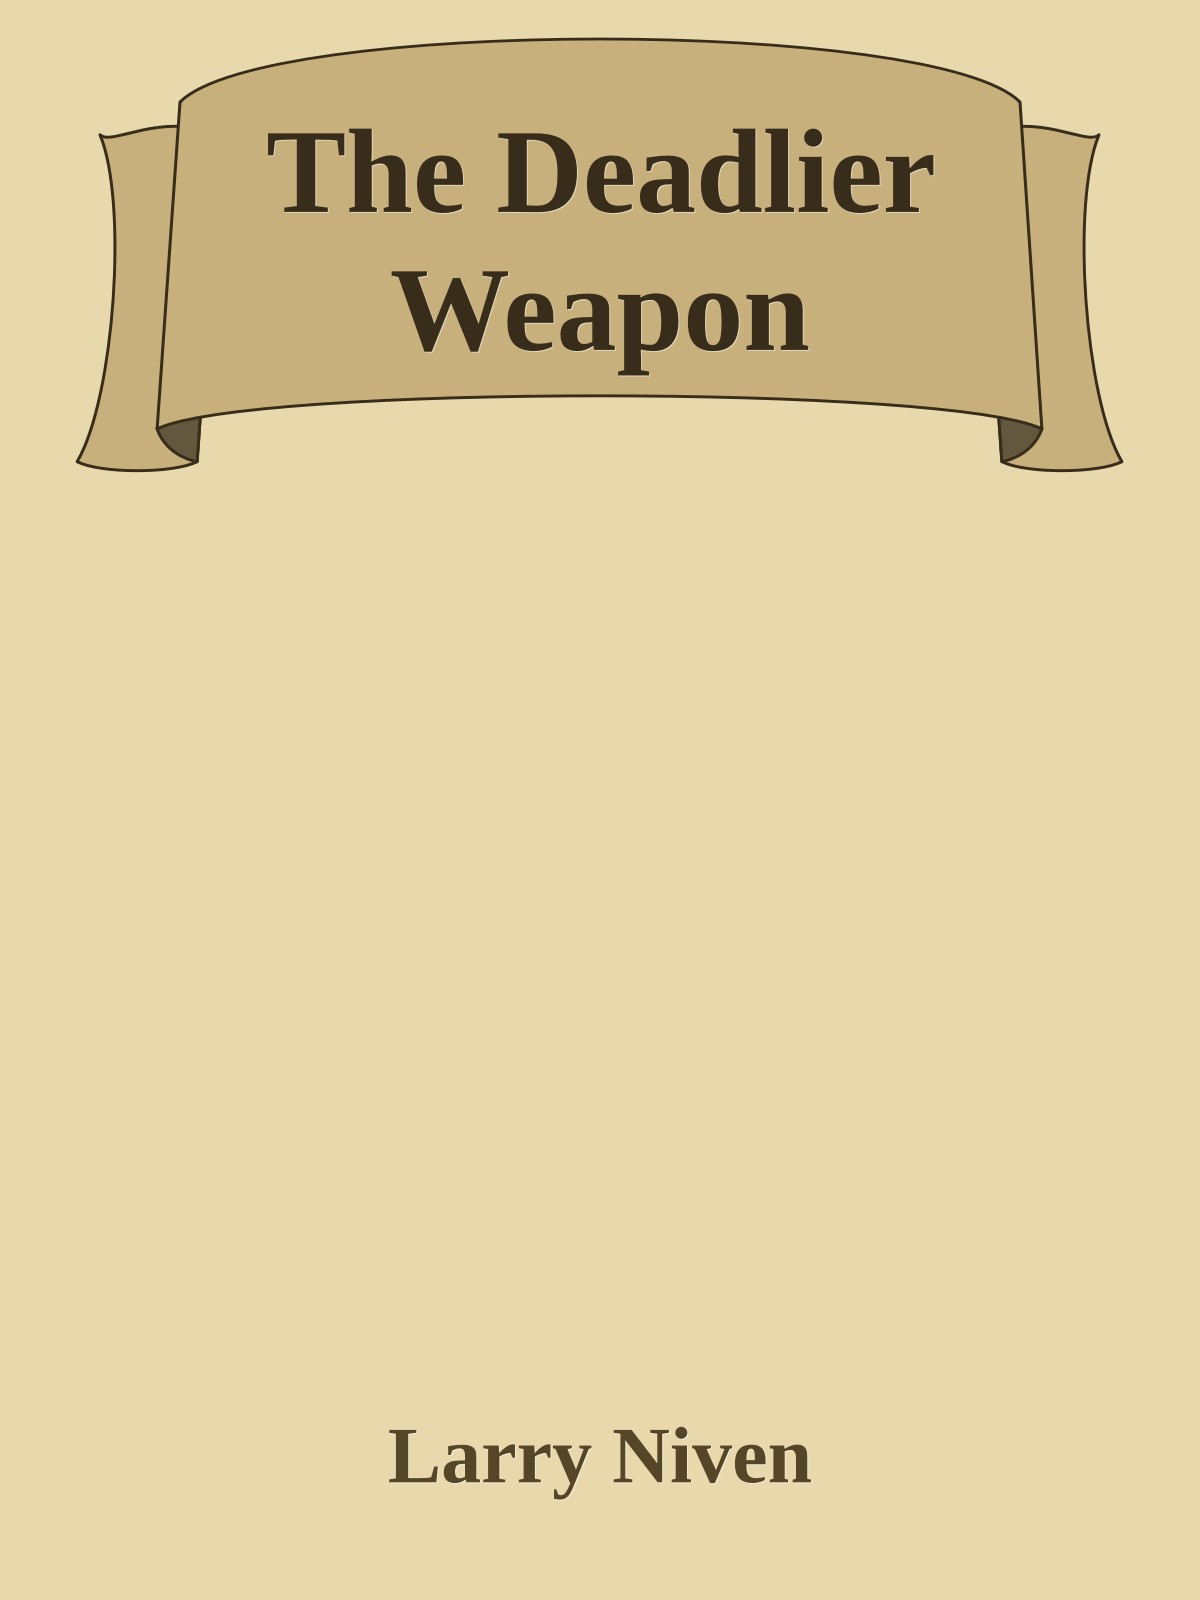 The Deadlier Weapon